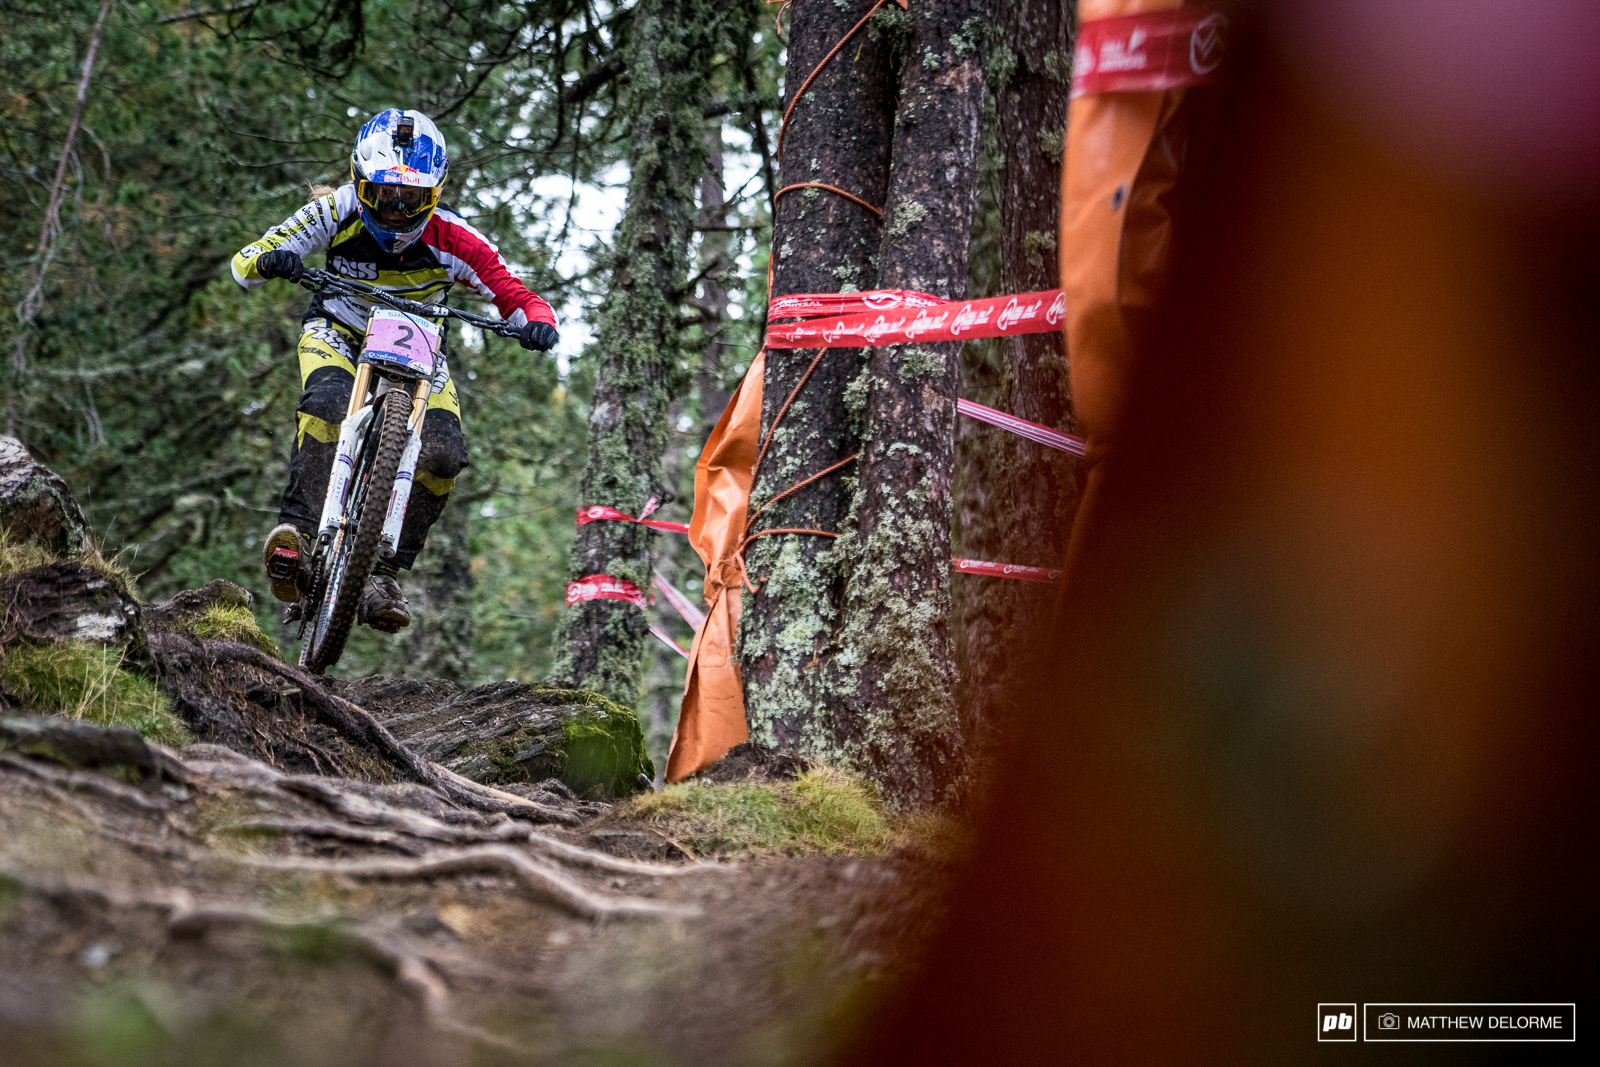 Rachel Atherton is on the hunt for another title.   Baring a major mishap it's hard not to see her on the top step.